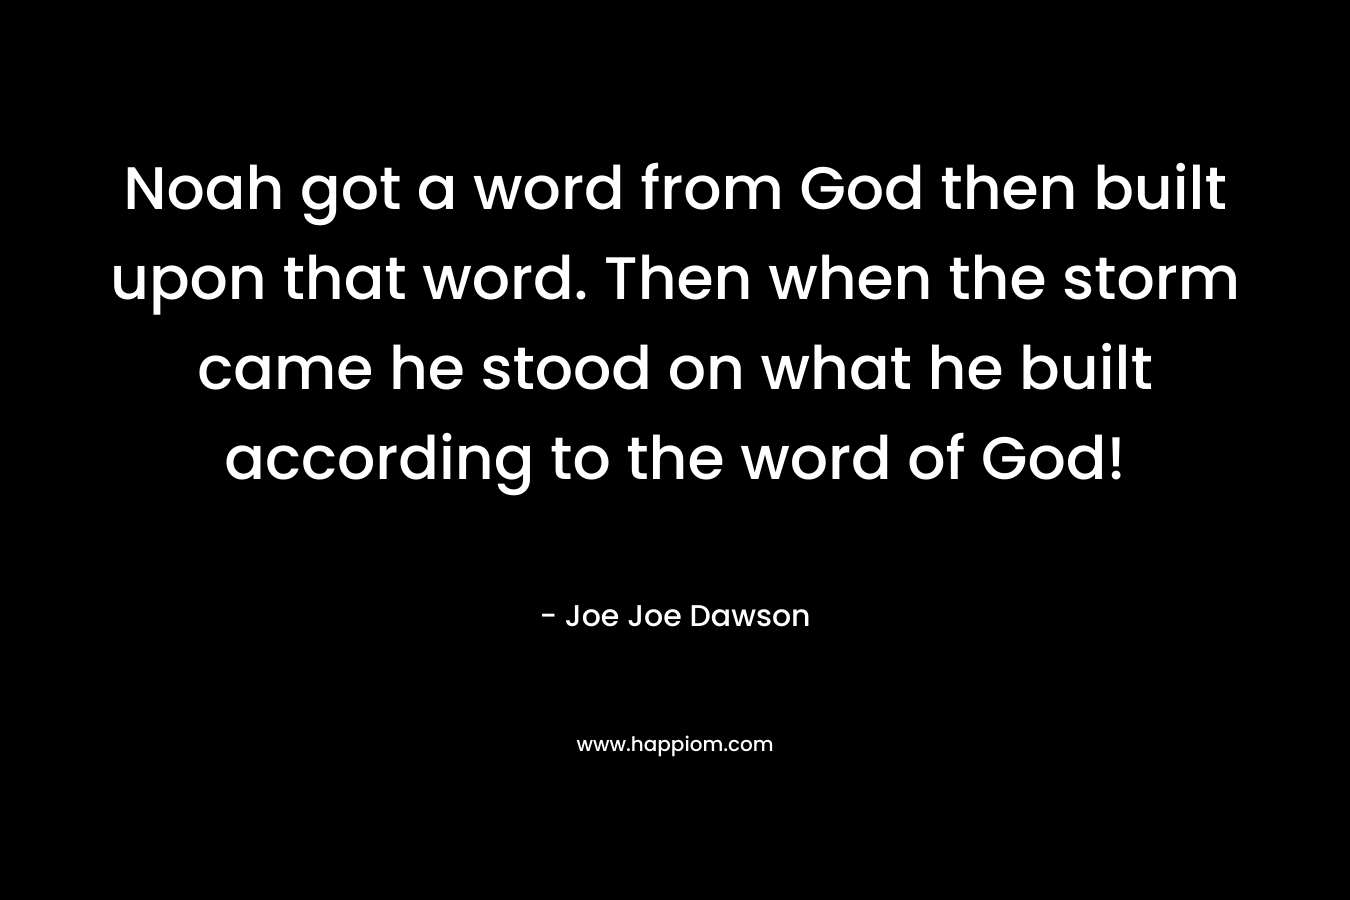 Noah got a word from God then built upon that word. Then when the storm came he stood on what he built according to the word of God! – Joe Joe Dawson